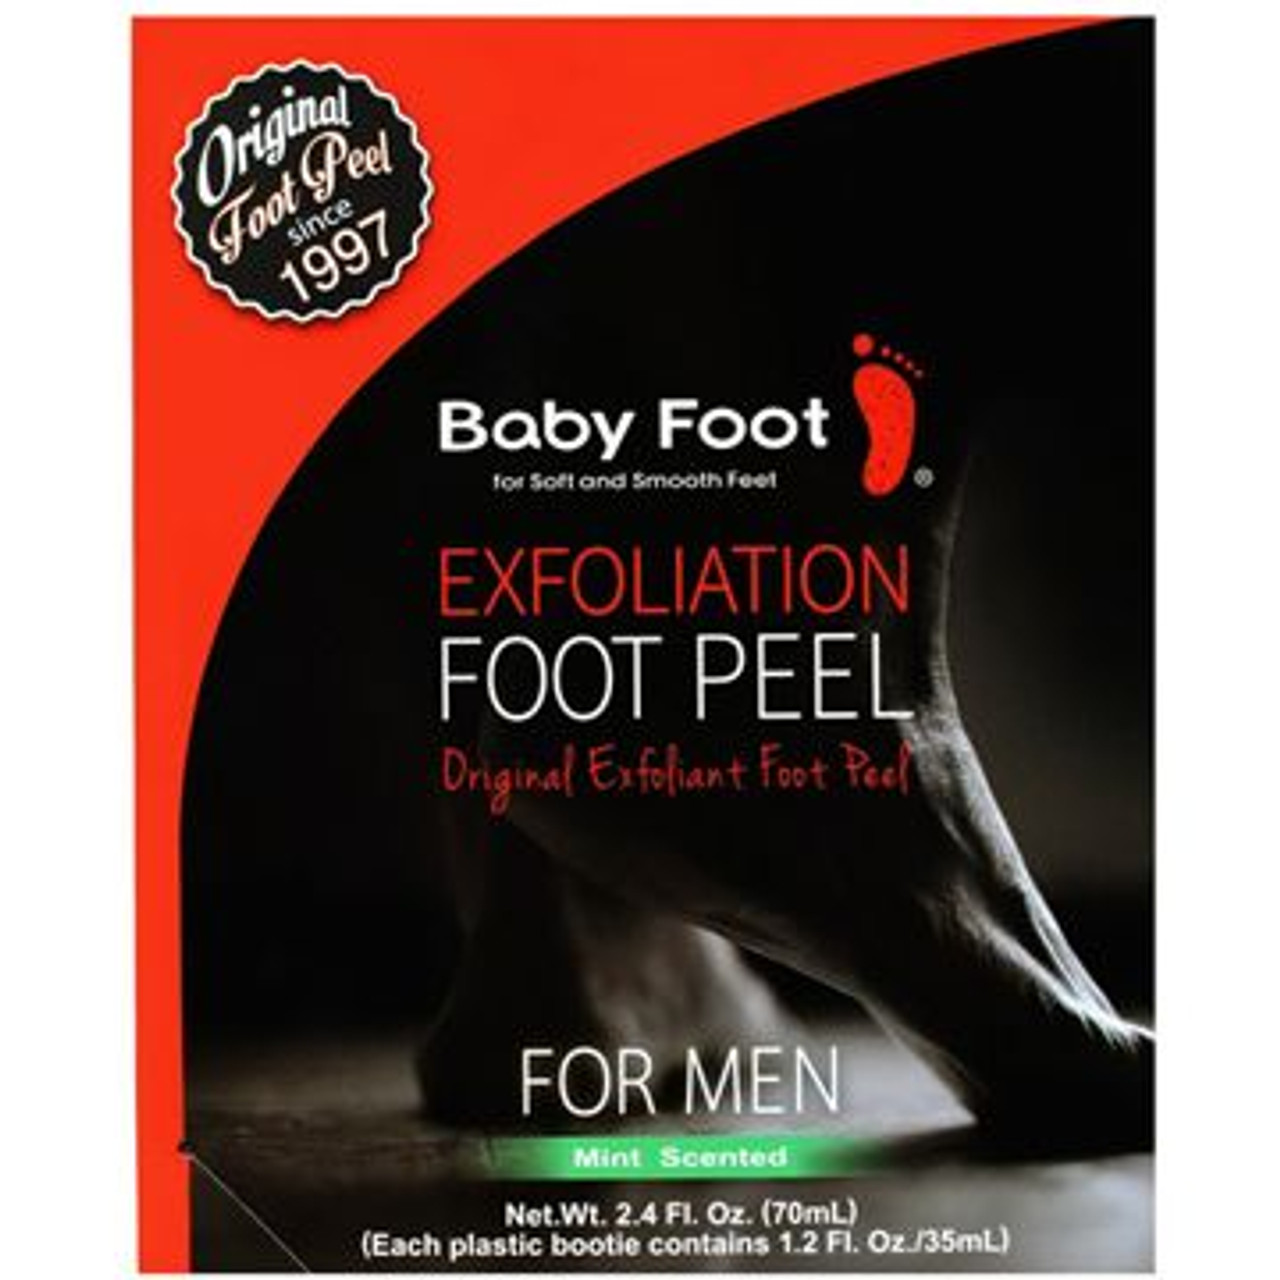 Baby Foot Exfoliation Foot Peel For Men - Mint Scented - 2.4 oz